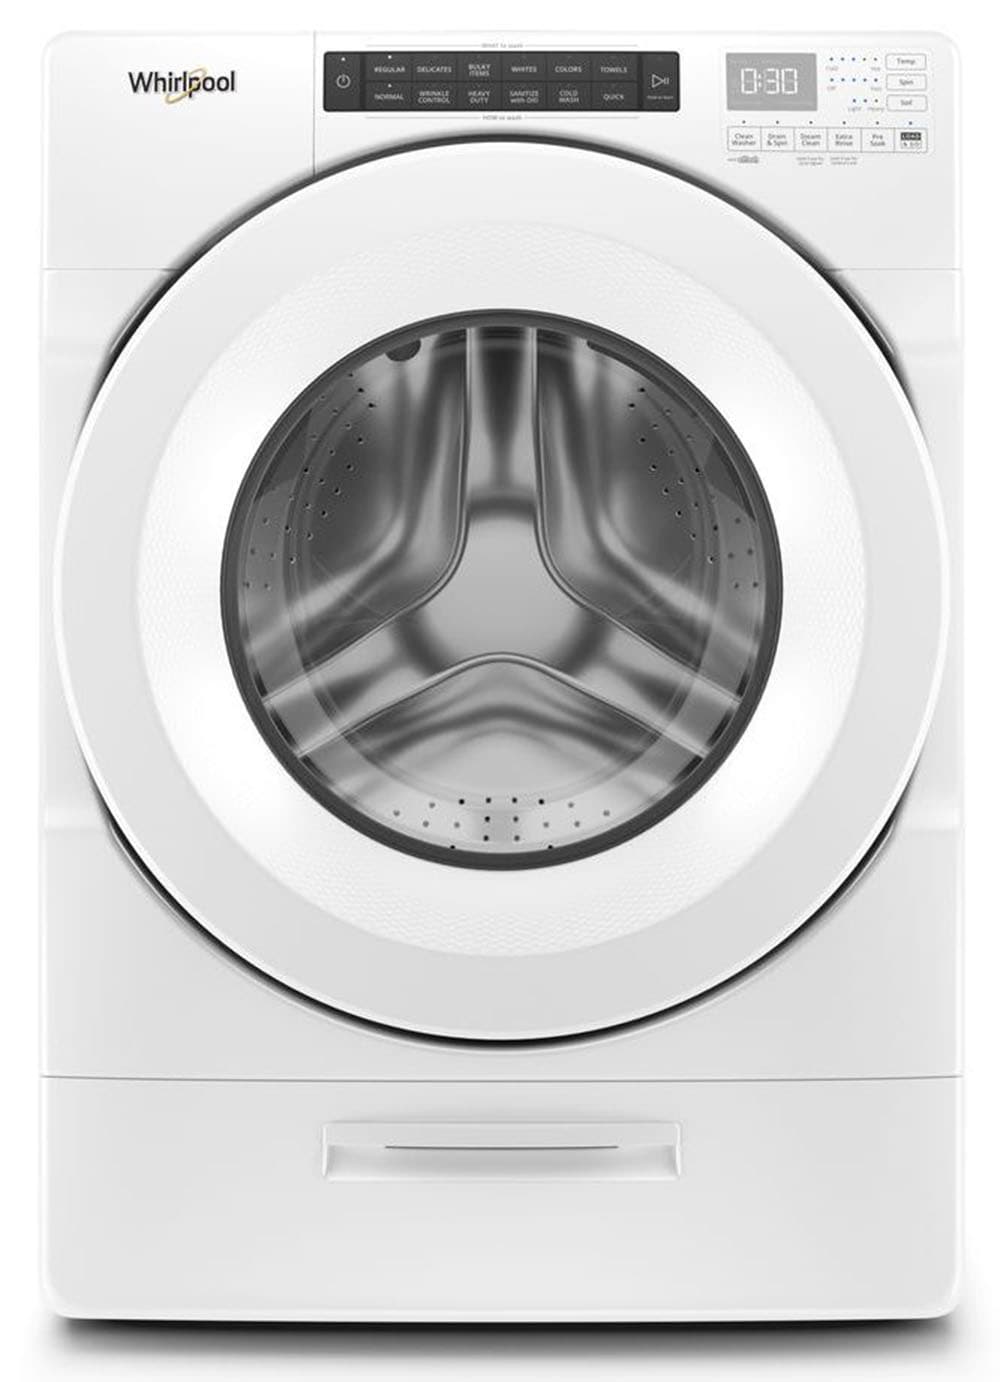 Whirlpool 4.5-cu ft Closet-Depth High-Efficiency Front Load Washer